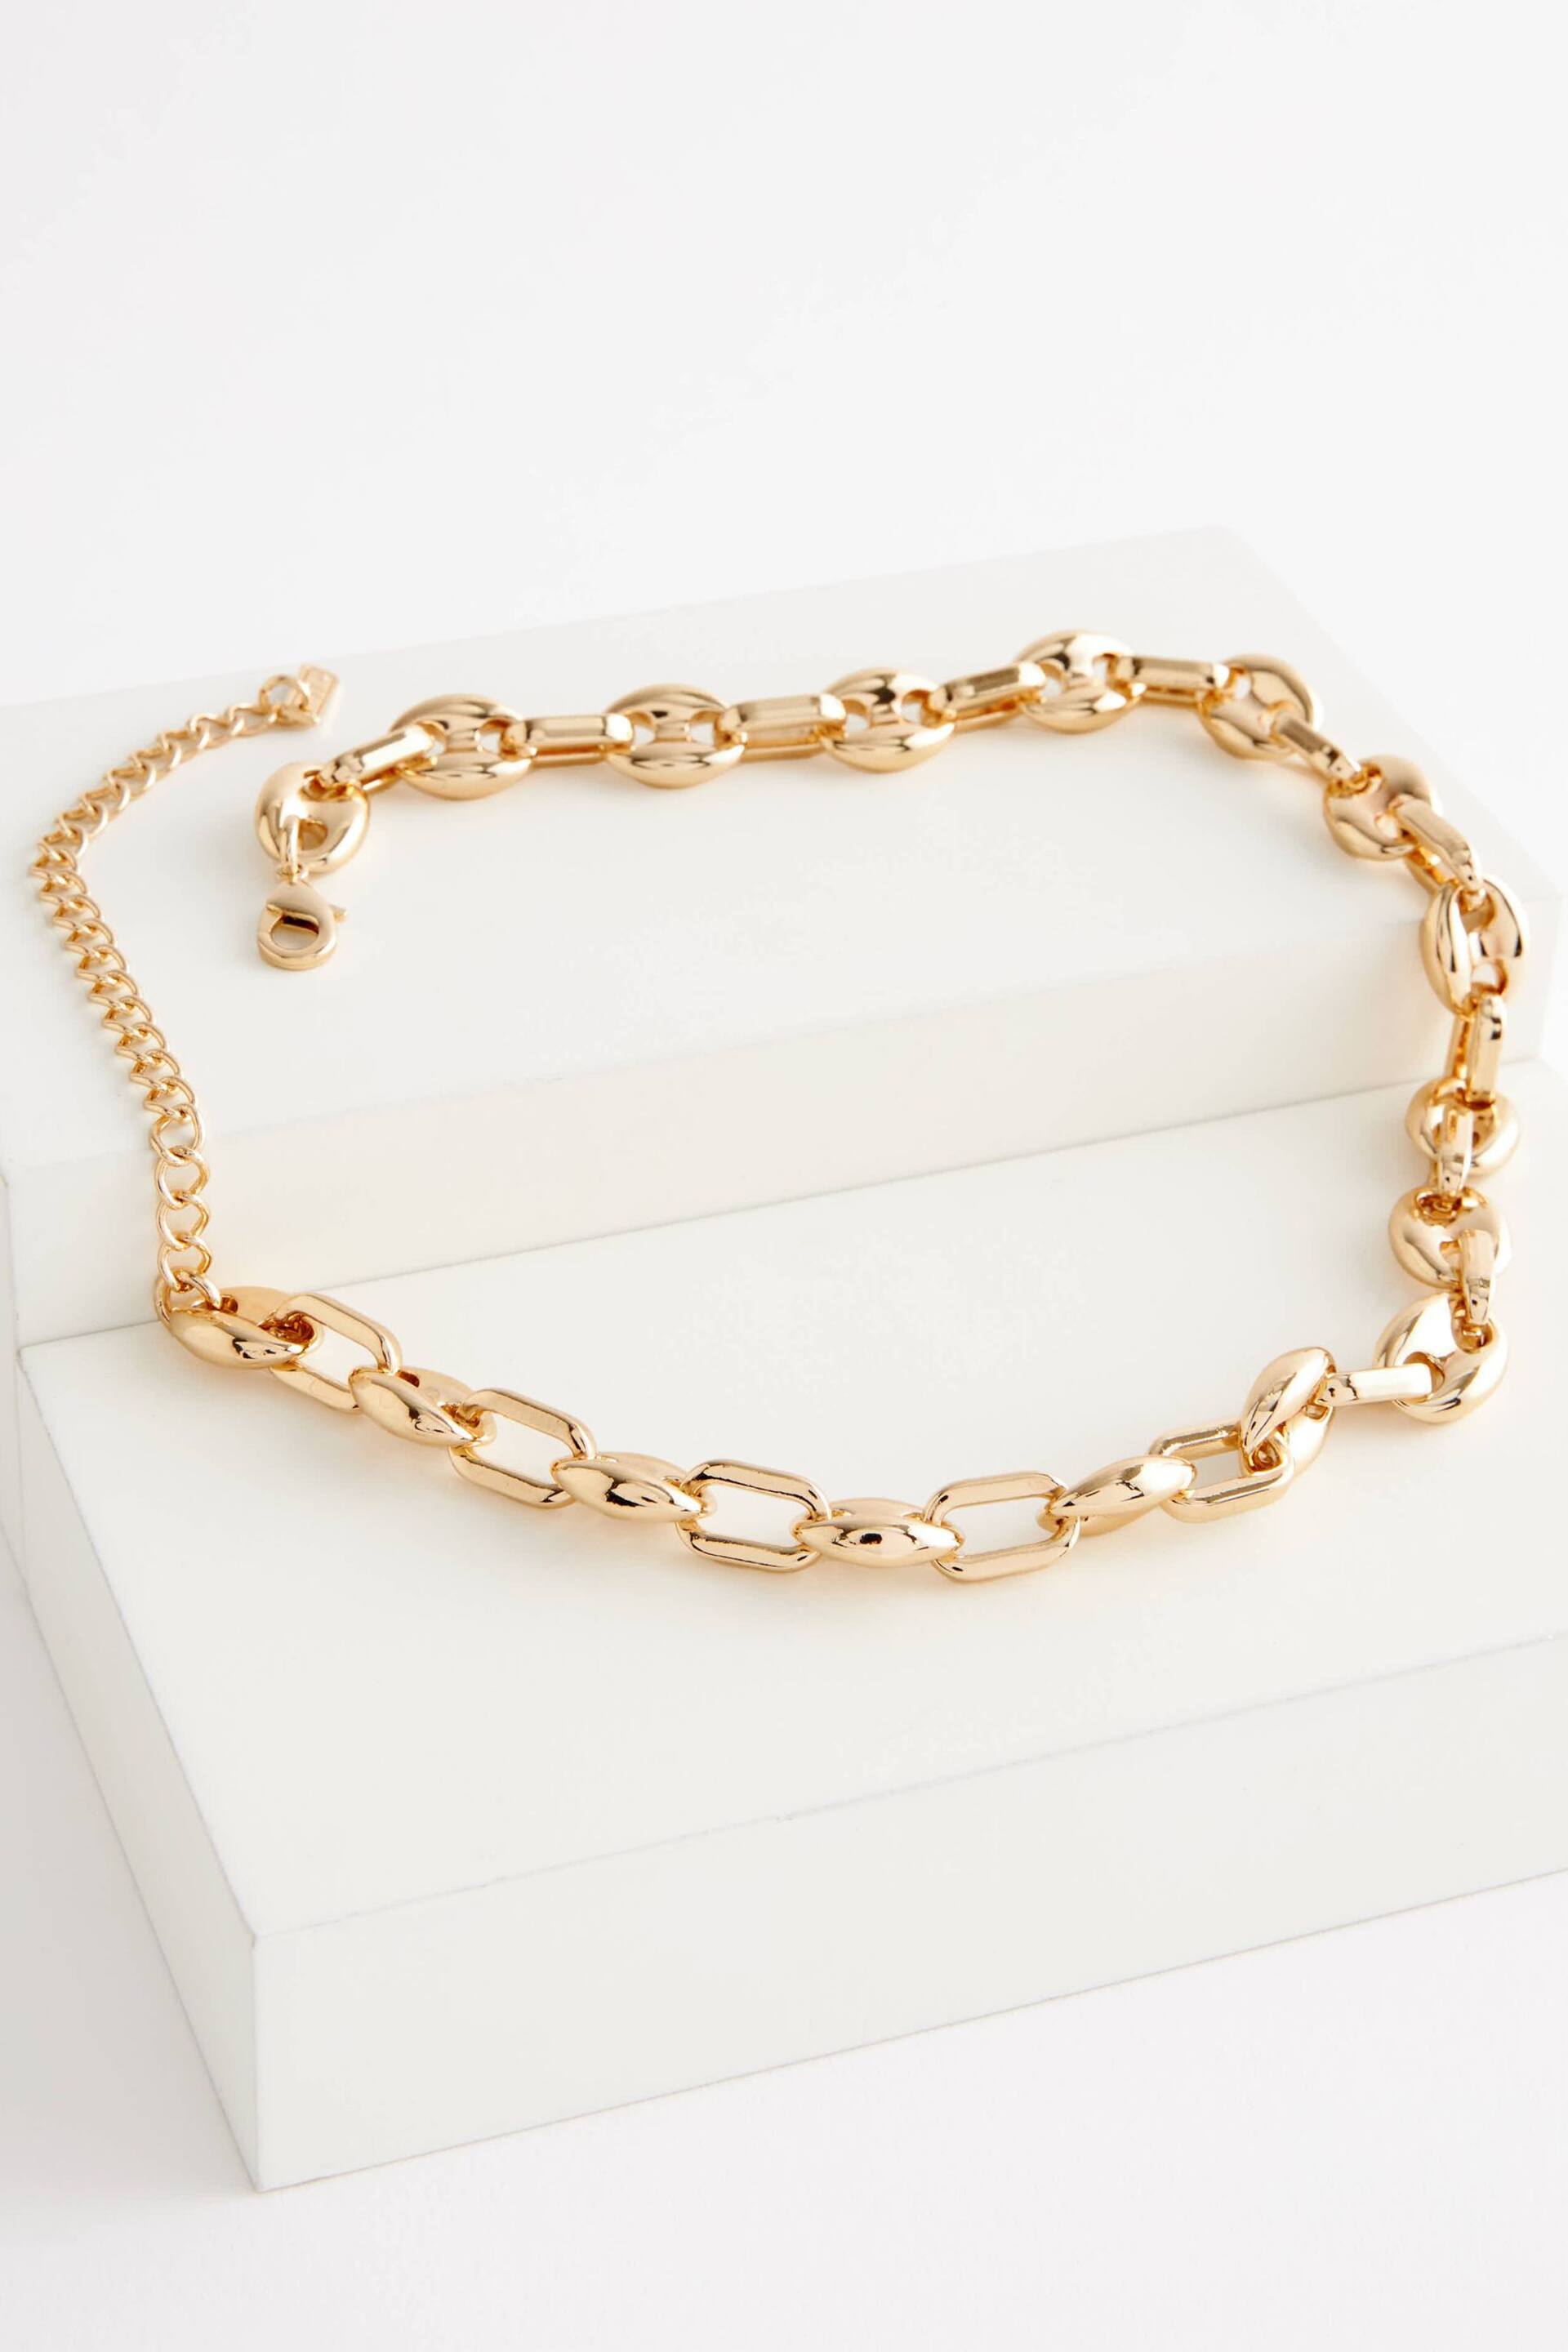 Gold Tone Chain Link Choker Necklace - Image 3 of 4